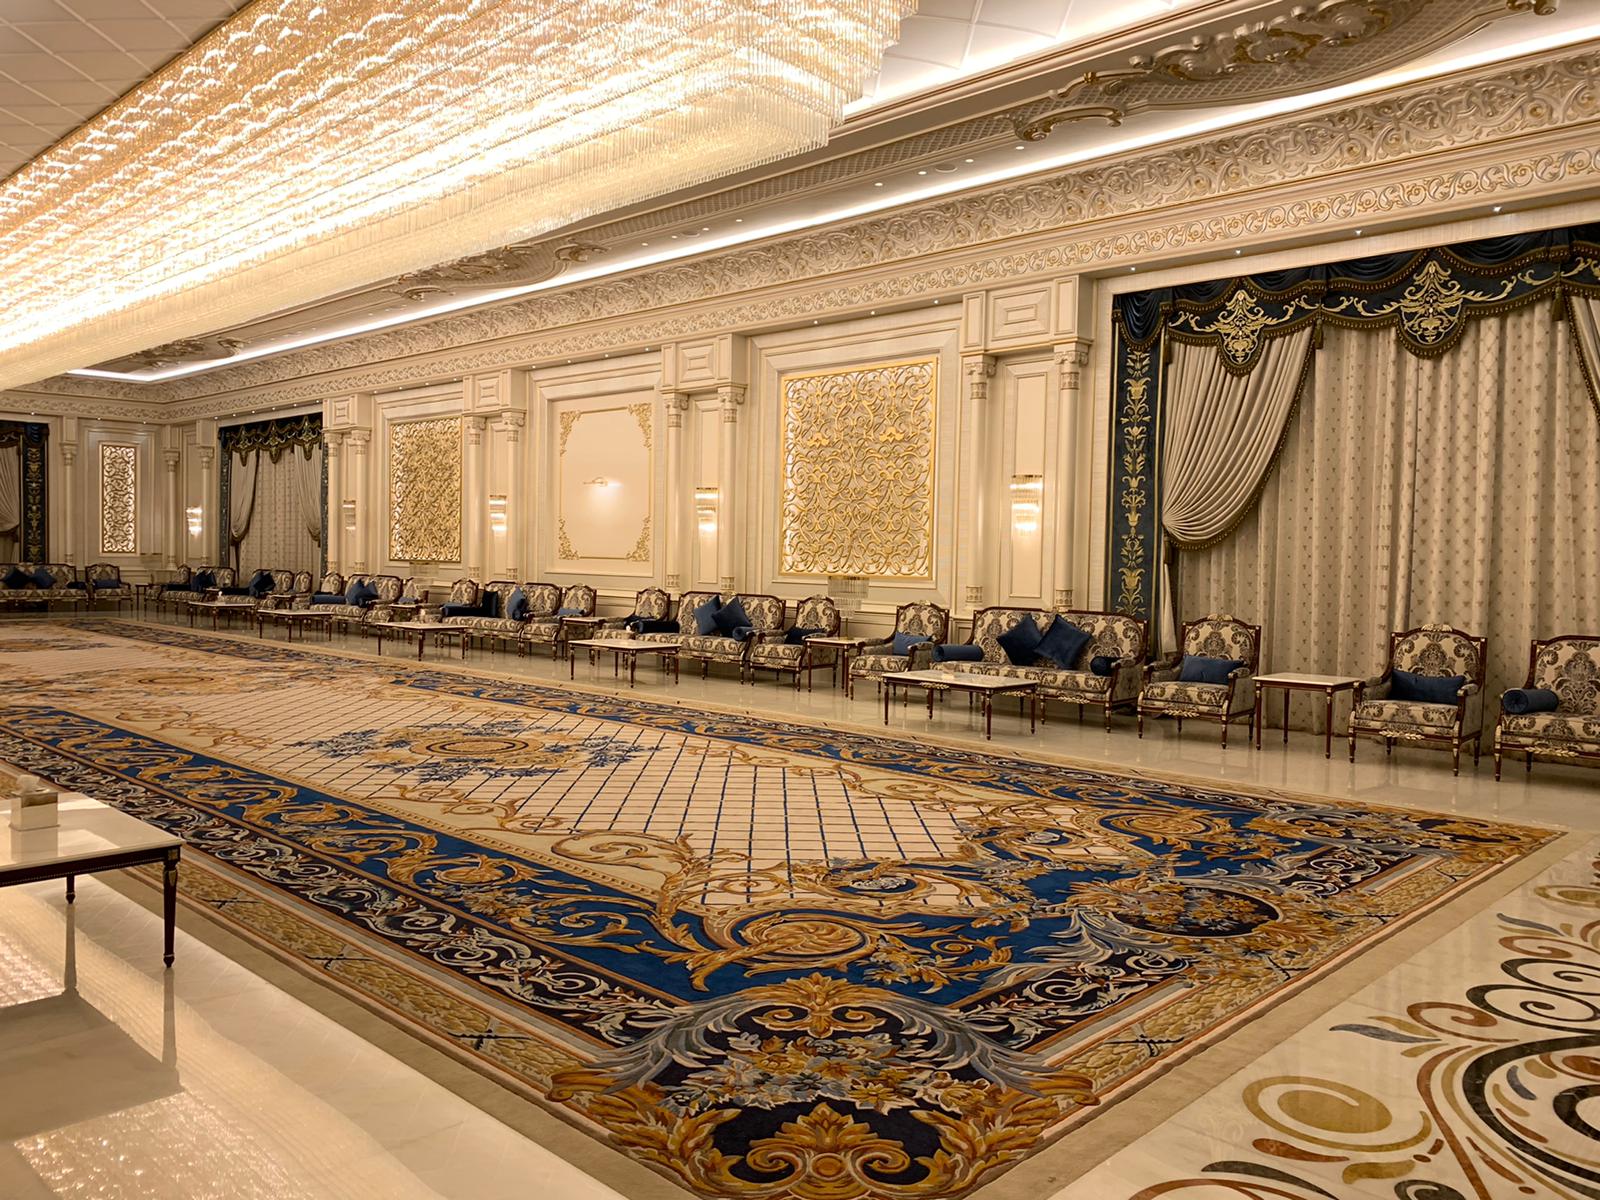 Classical Interior Design From Top Interior Designers In Kuwait. Production of stunning premium furniture for luxurious mansions. Best interior design company in Kuwait.